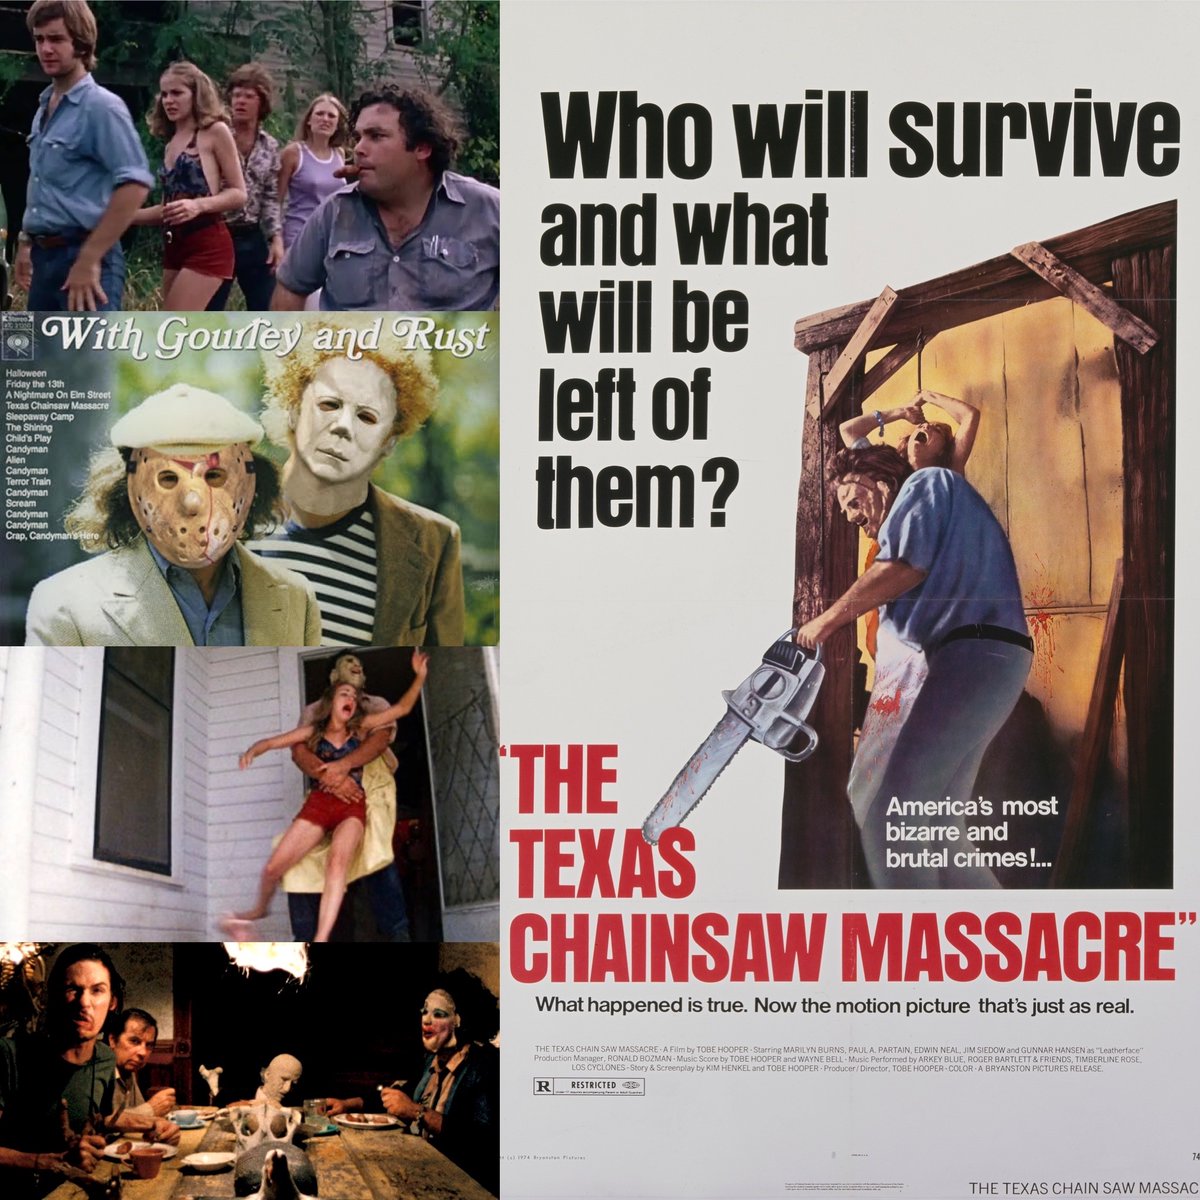 Today on the “With @GourleyAndRust” podcast, @MattGourley and I witness… 

“THE TEXAS CHAINSAW MASSACRE!!!”

Listen now at patreon.com/withgourleyand…